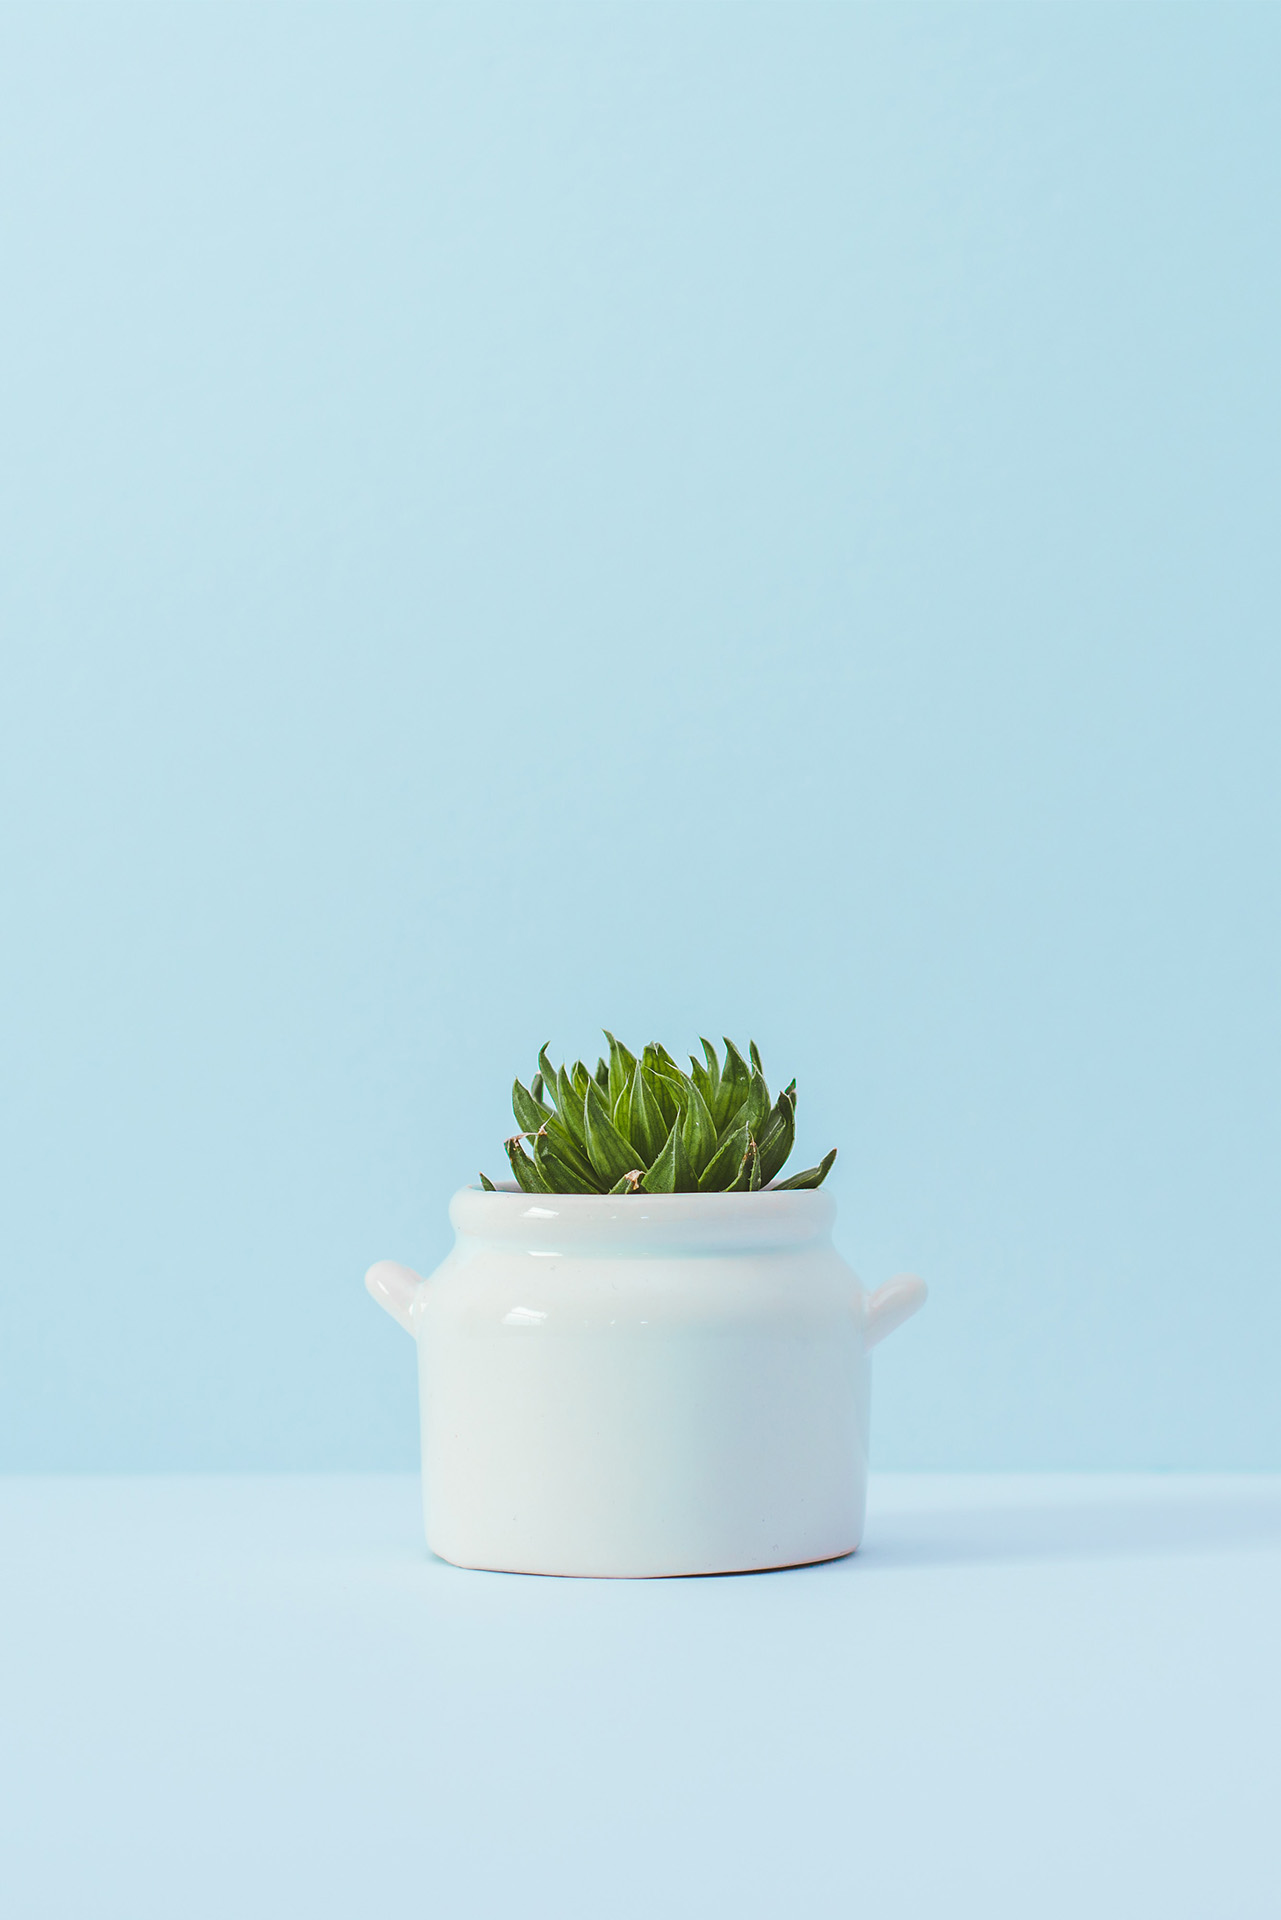 Succulent in a white pot in front of light blue background